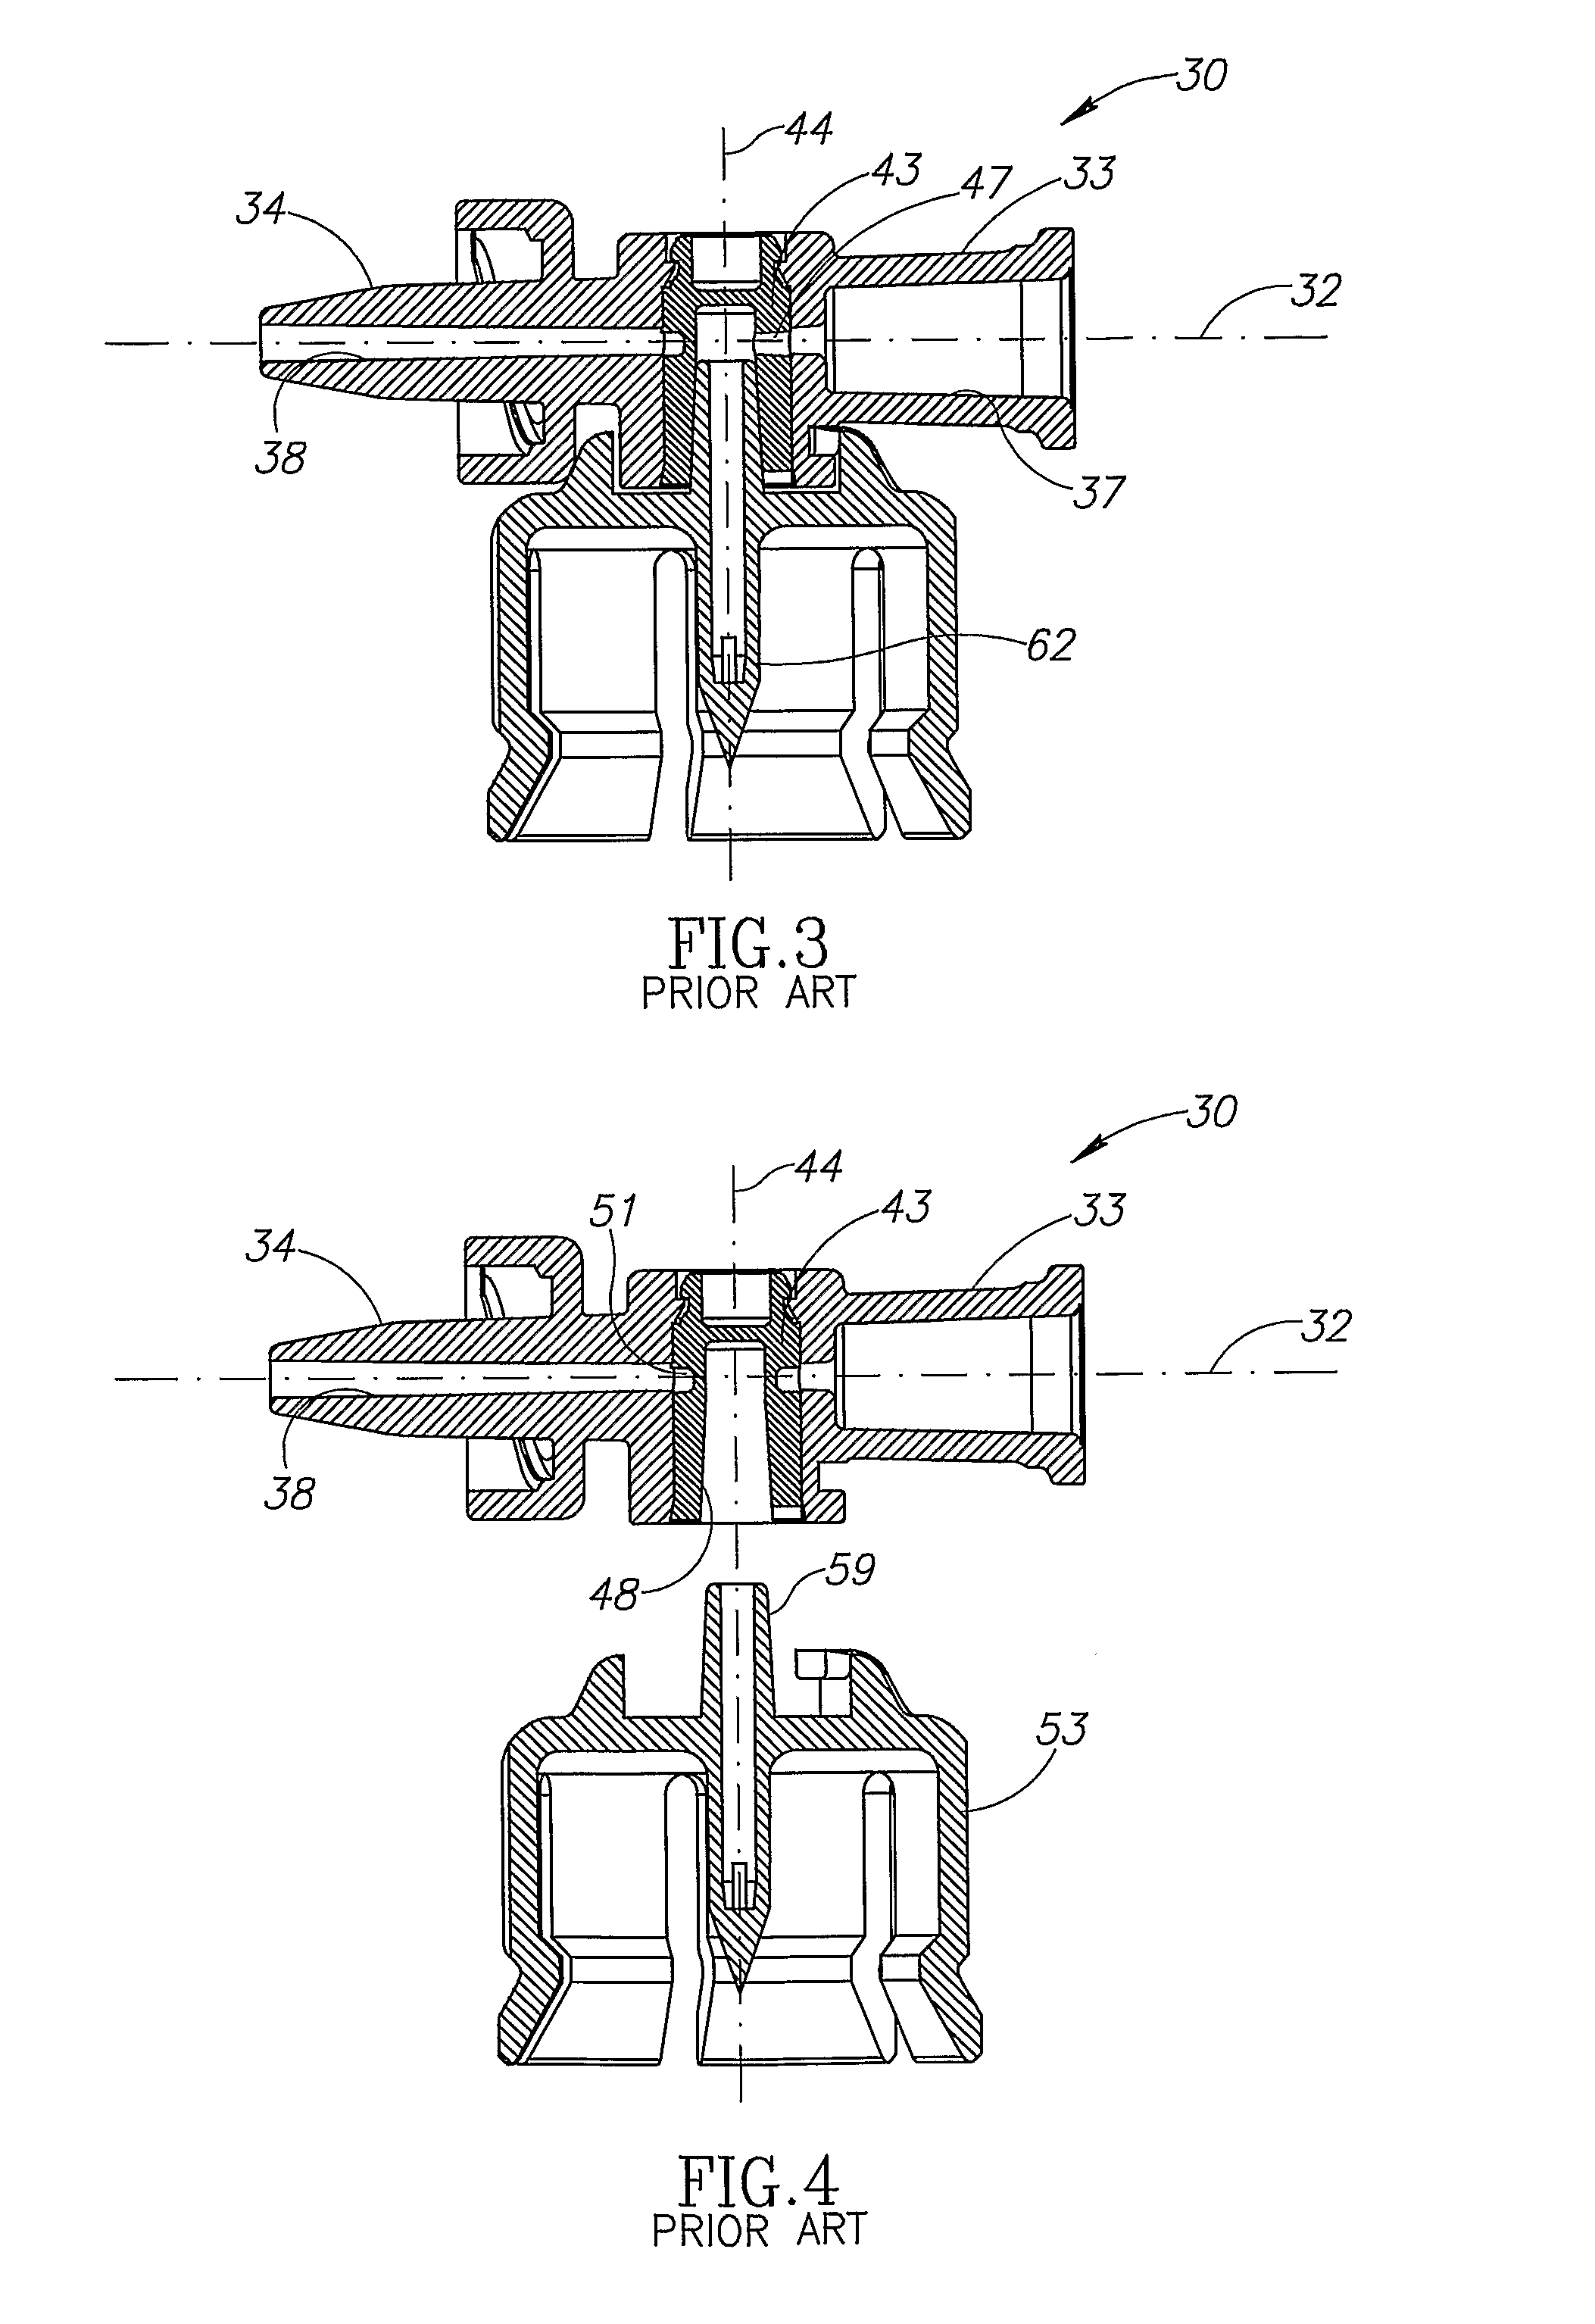 Fluid control device with manually depressed actuator